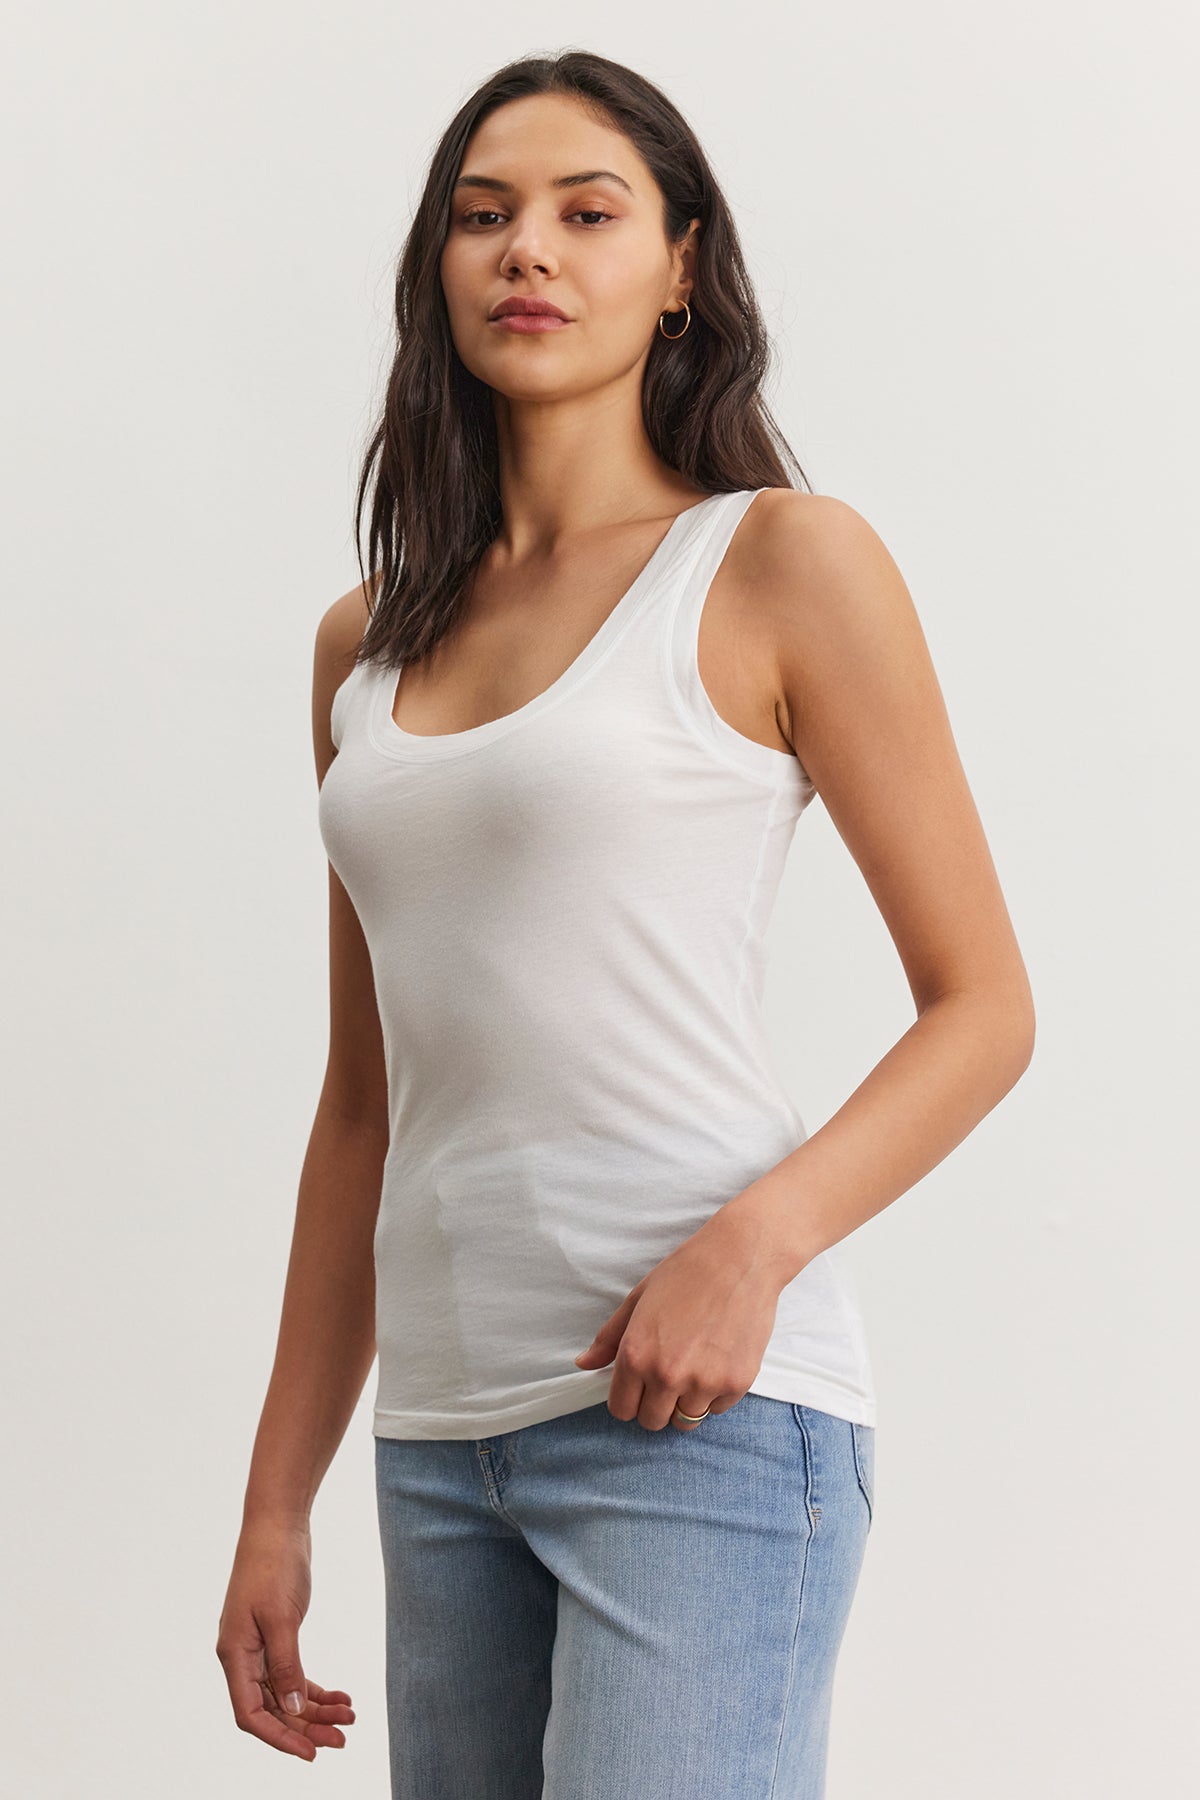 A person with long dark hair is wearing a white, fitted MOSSY TANK TOP by Velvet by Graham & Spencer and light blue jeans, standing with a neutral expression against a plain background. This ensemble highlights the versatility of a well-curated wardrobe.-36984063787201